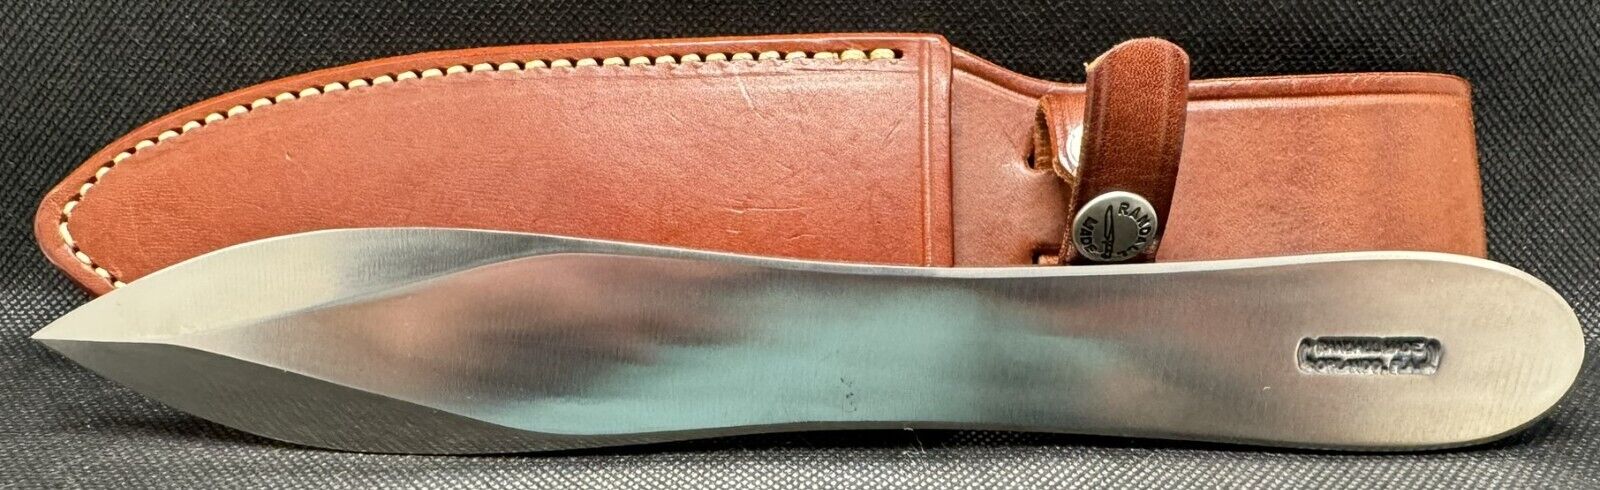 RANDALL MADE KNIVES MODEL 9  PRO THROWER  VINTAGE  10